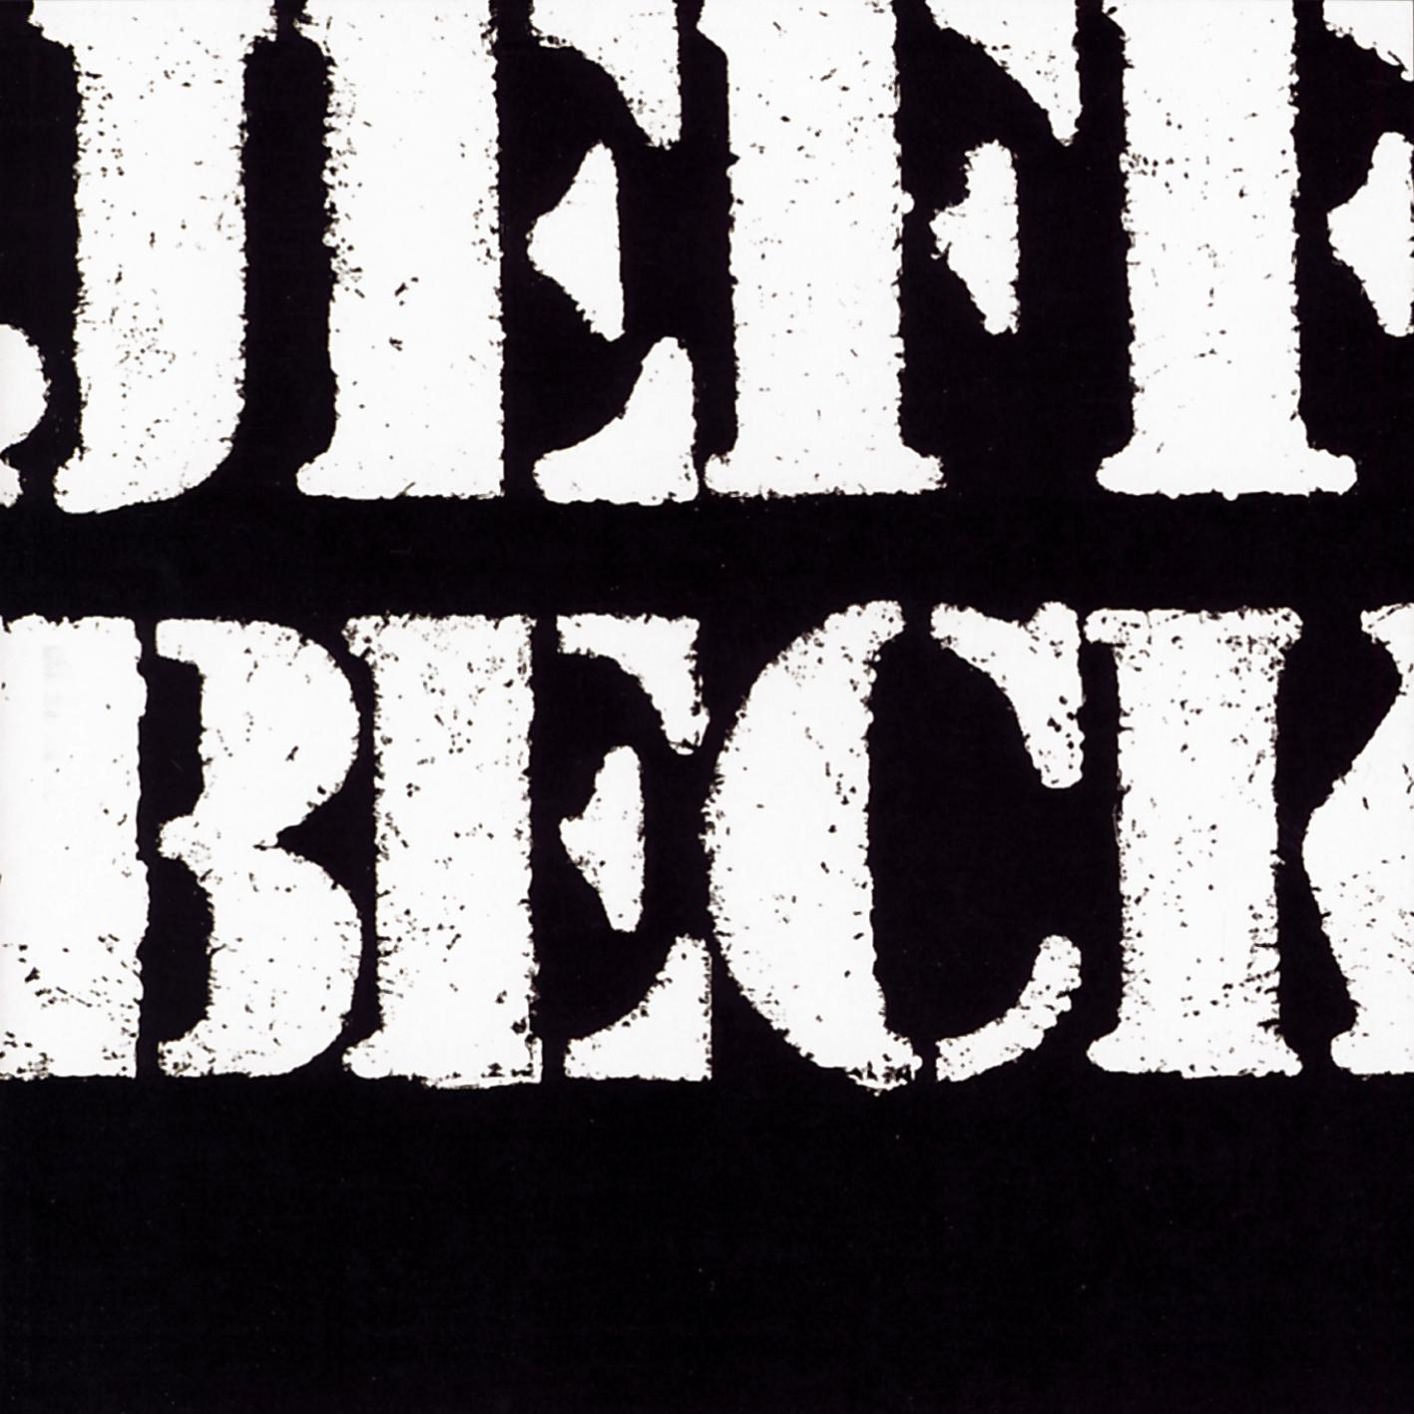 Jeff Beck - There And Back (1980/2013) [HDTracks FLAC 24bit/96kHz]